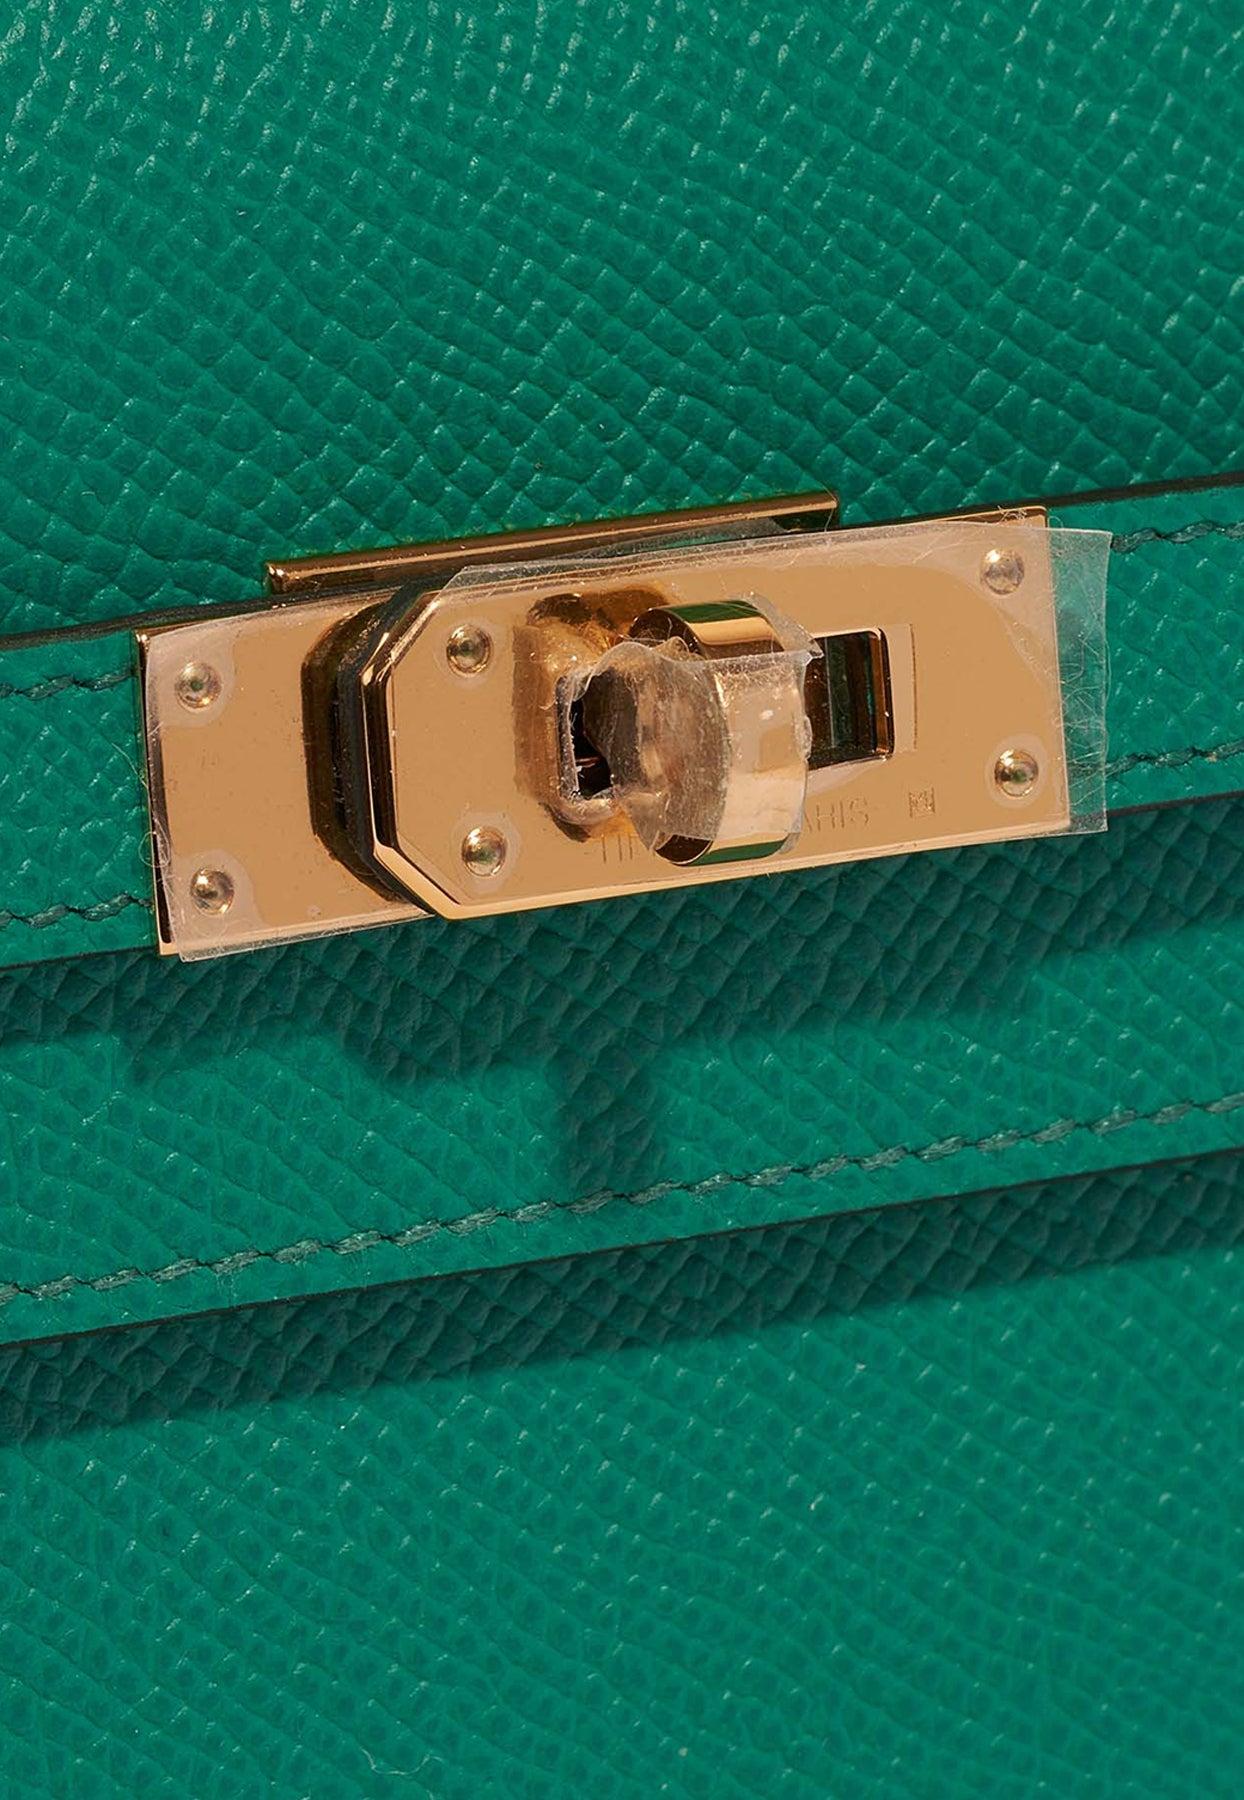 Hermès Kelly To Go Wallet In Vert Jade Epsom With Gold Hardware in